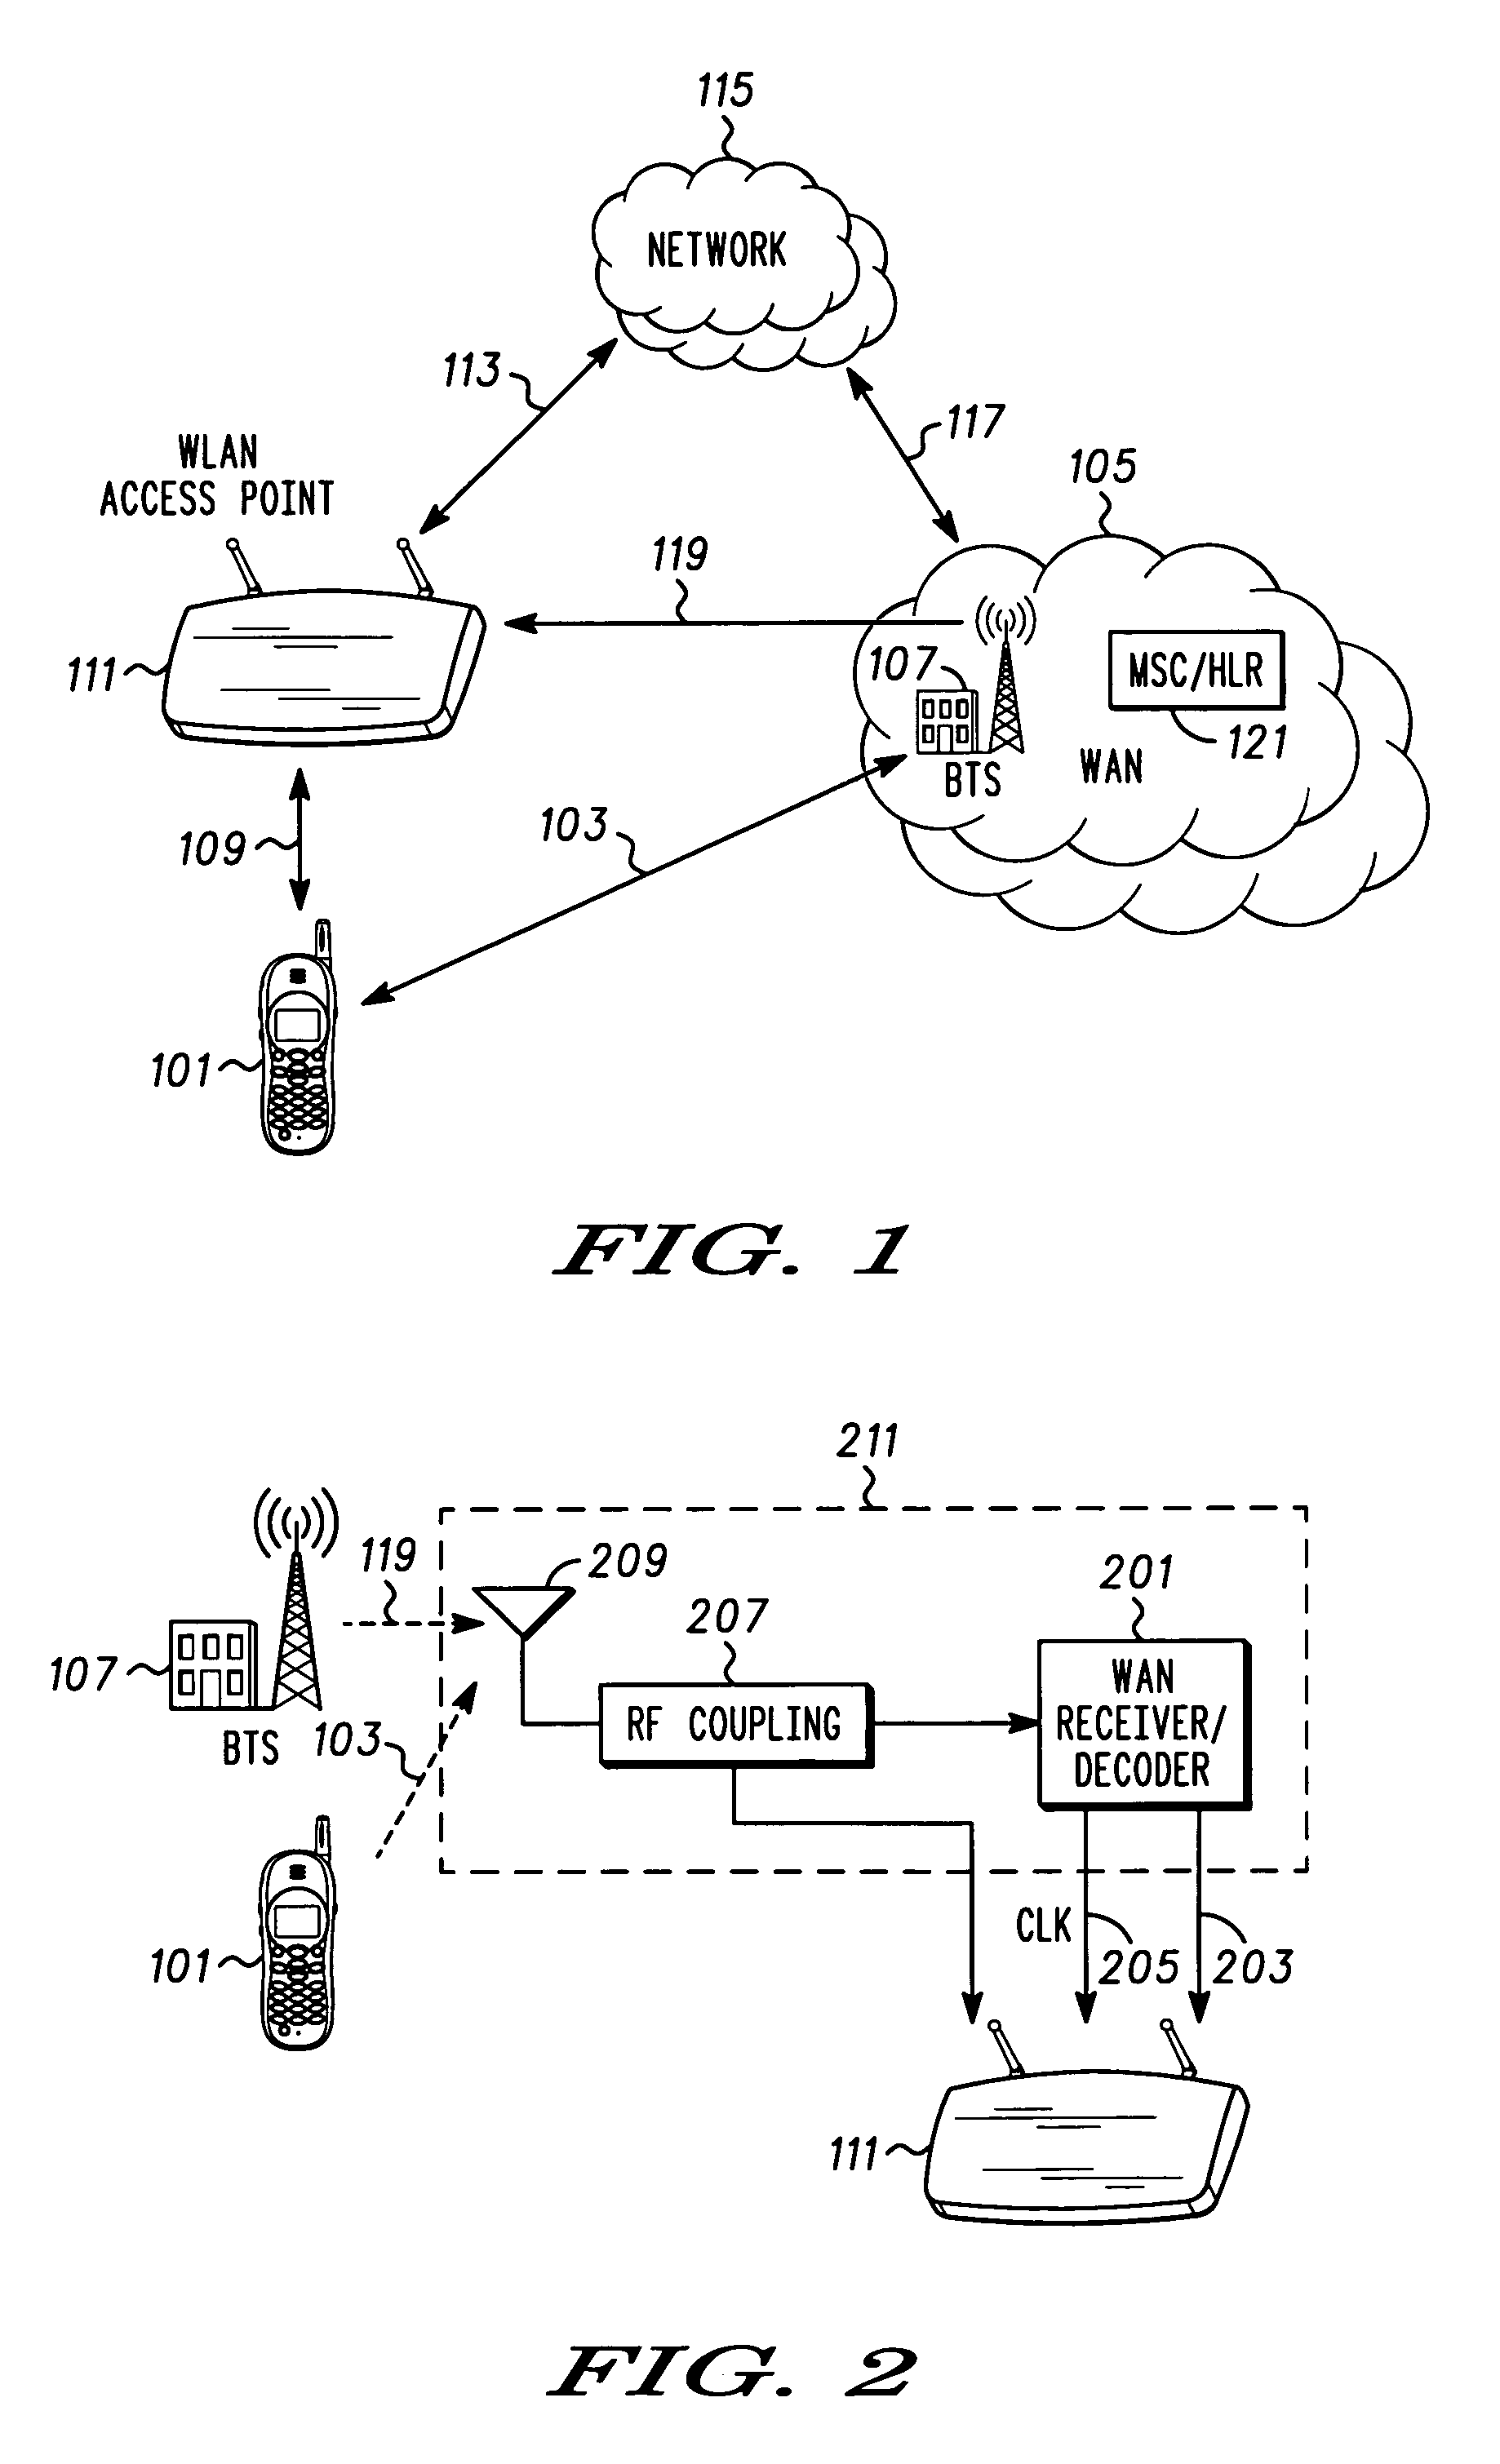 Mechanism for hand off using access point detection of synchronized subscriber beacon transmissions